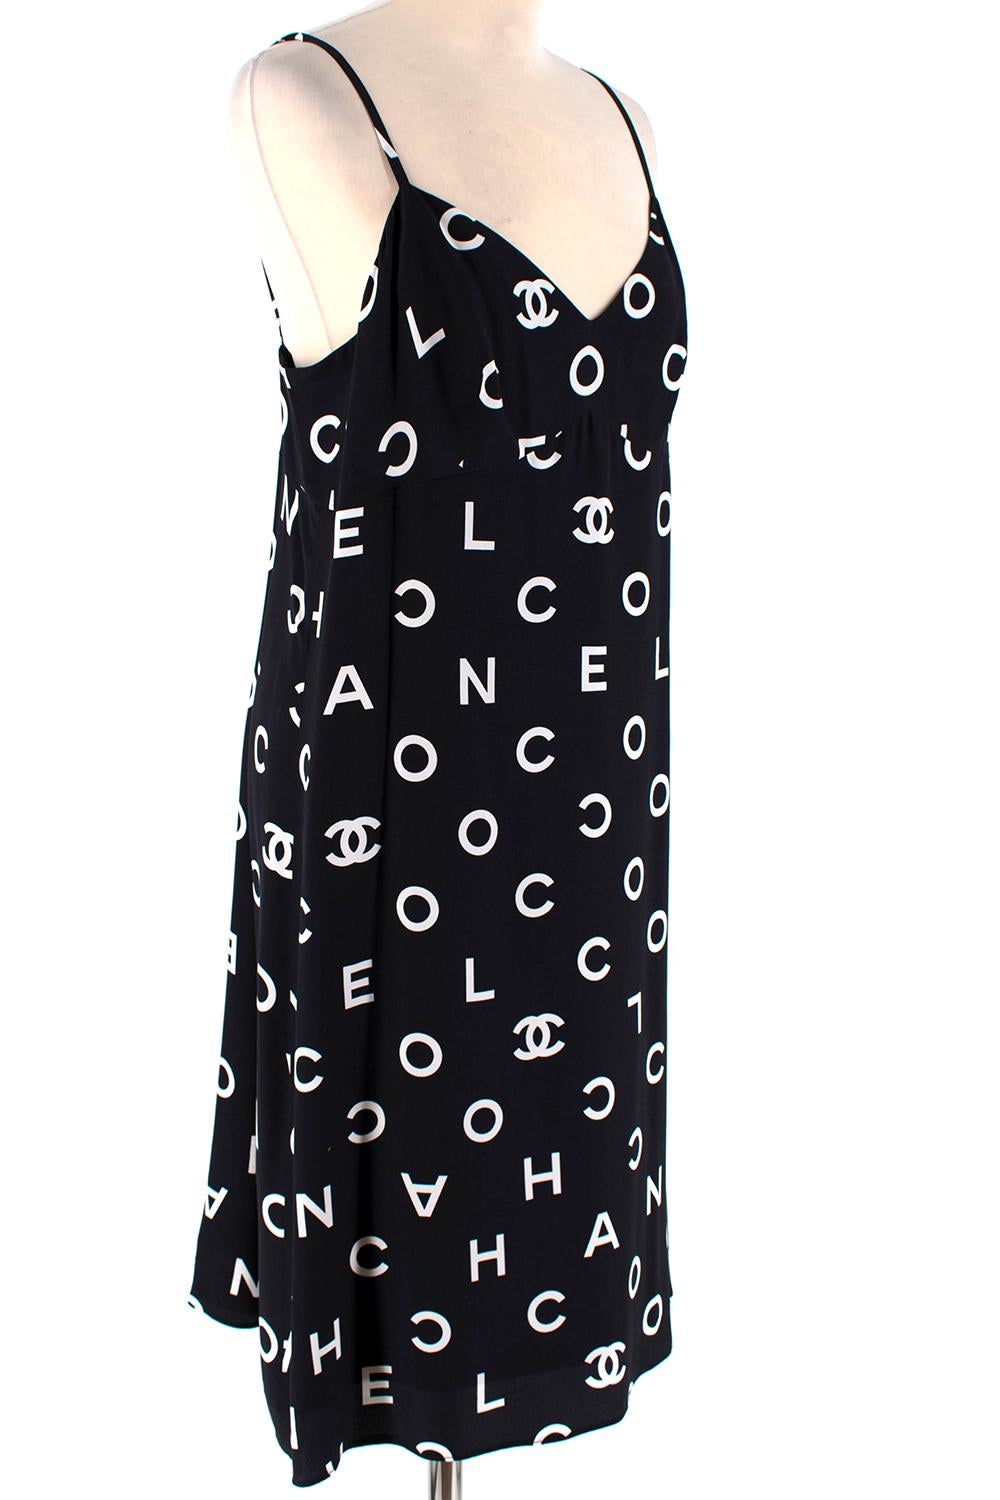 Chanel Vintage Black & White Coco Logo Sleeveless Mini Dress

- COCO logo body, white on black
- Vintage Spring 1997 collection
- Beautiful Bralette Strap
- Logo Chanel Buttons 
- Zip and button closure to the back 
-Unlined and